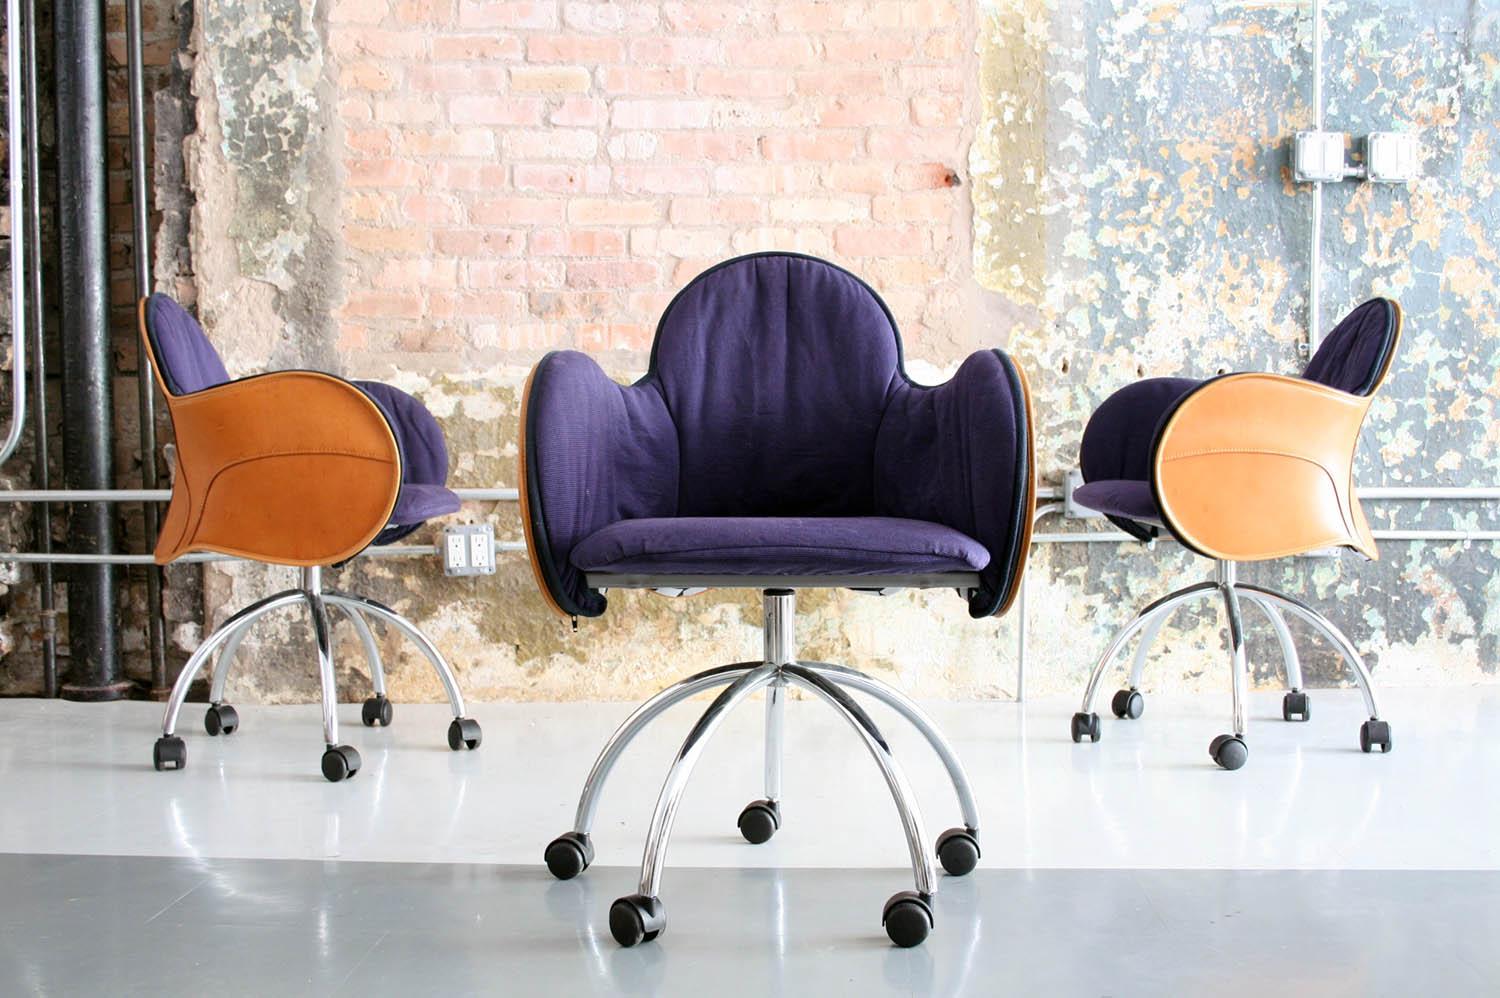 Designed in 1992 by Vico Magistretti for De Padova, Italy. The Incisa swivel chair is the ideal seat for the corporate office and meeting room, but also for the desk of home. The chair is distinguished by its external seat leather upholstery, shaped